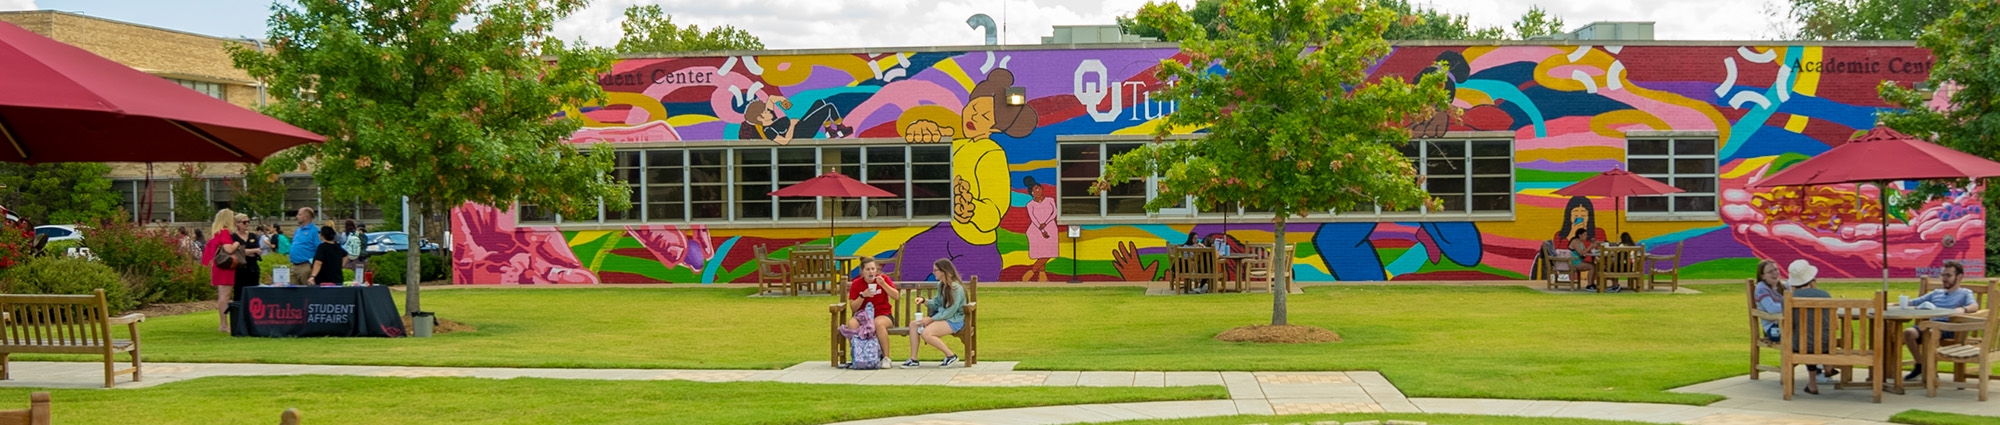 Students sit on benches in a wide green space overlooked by a large, colorful mural in the background